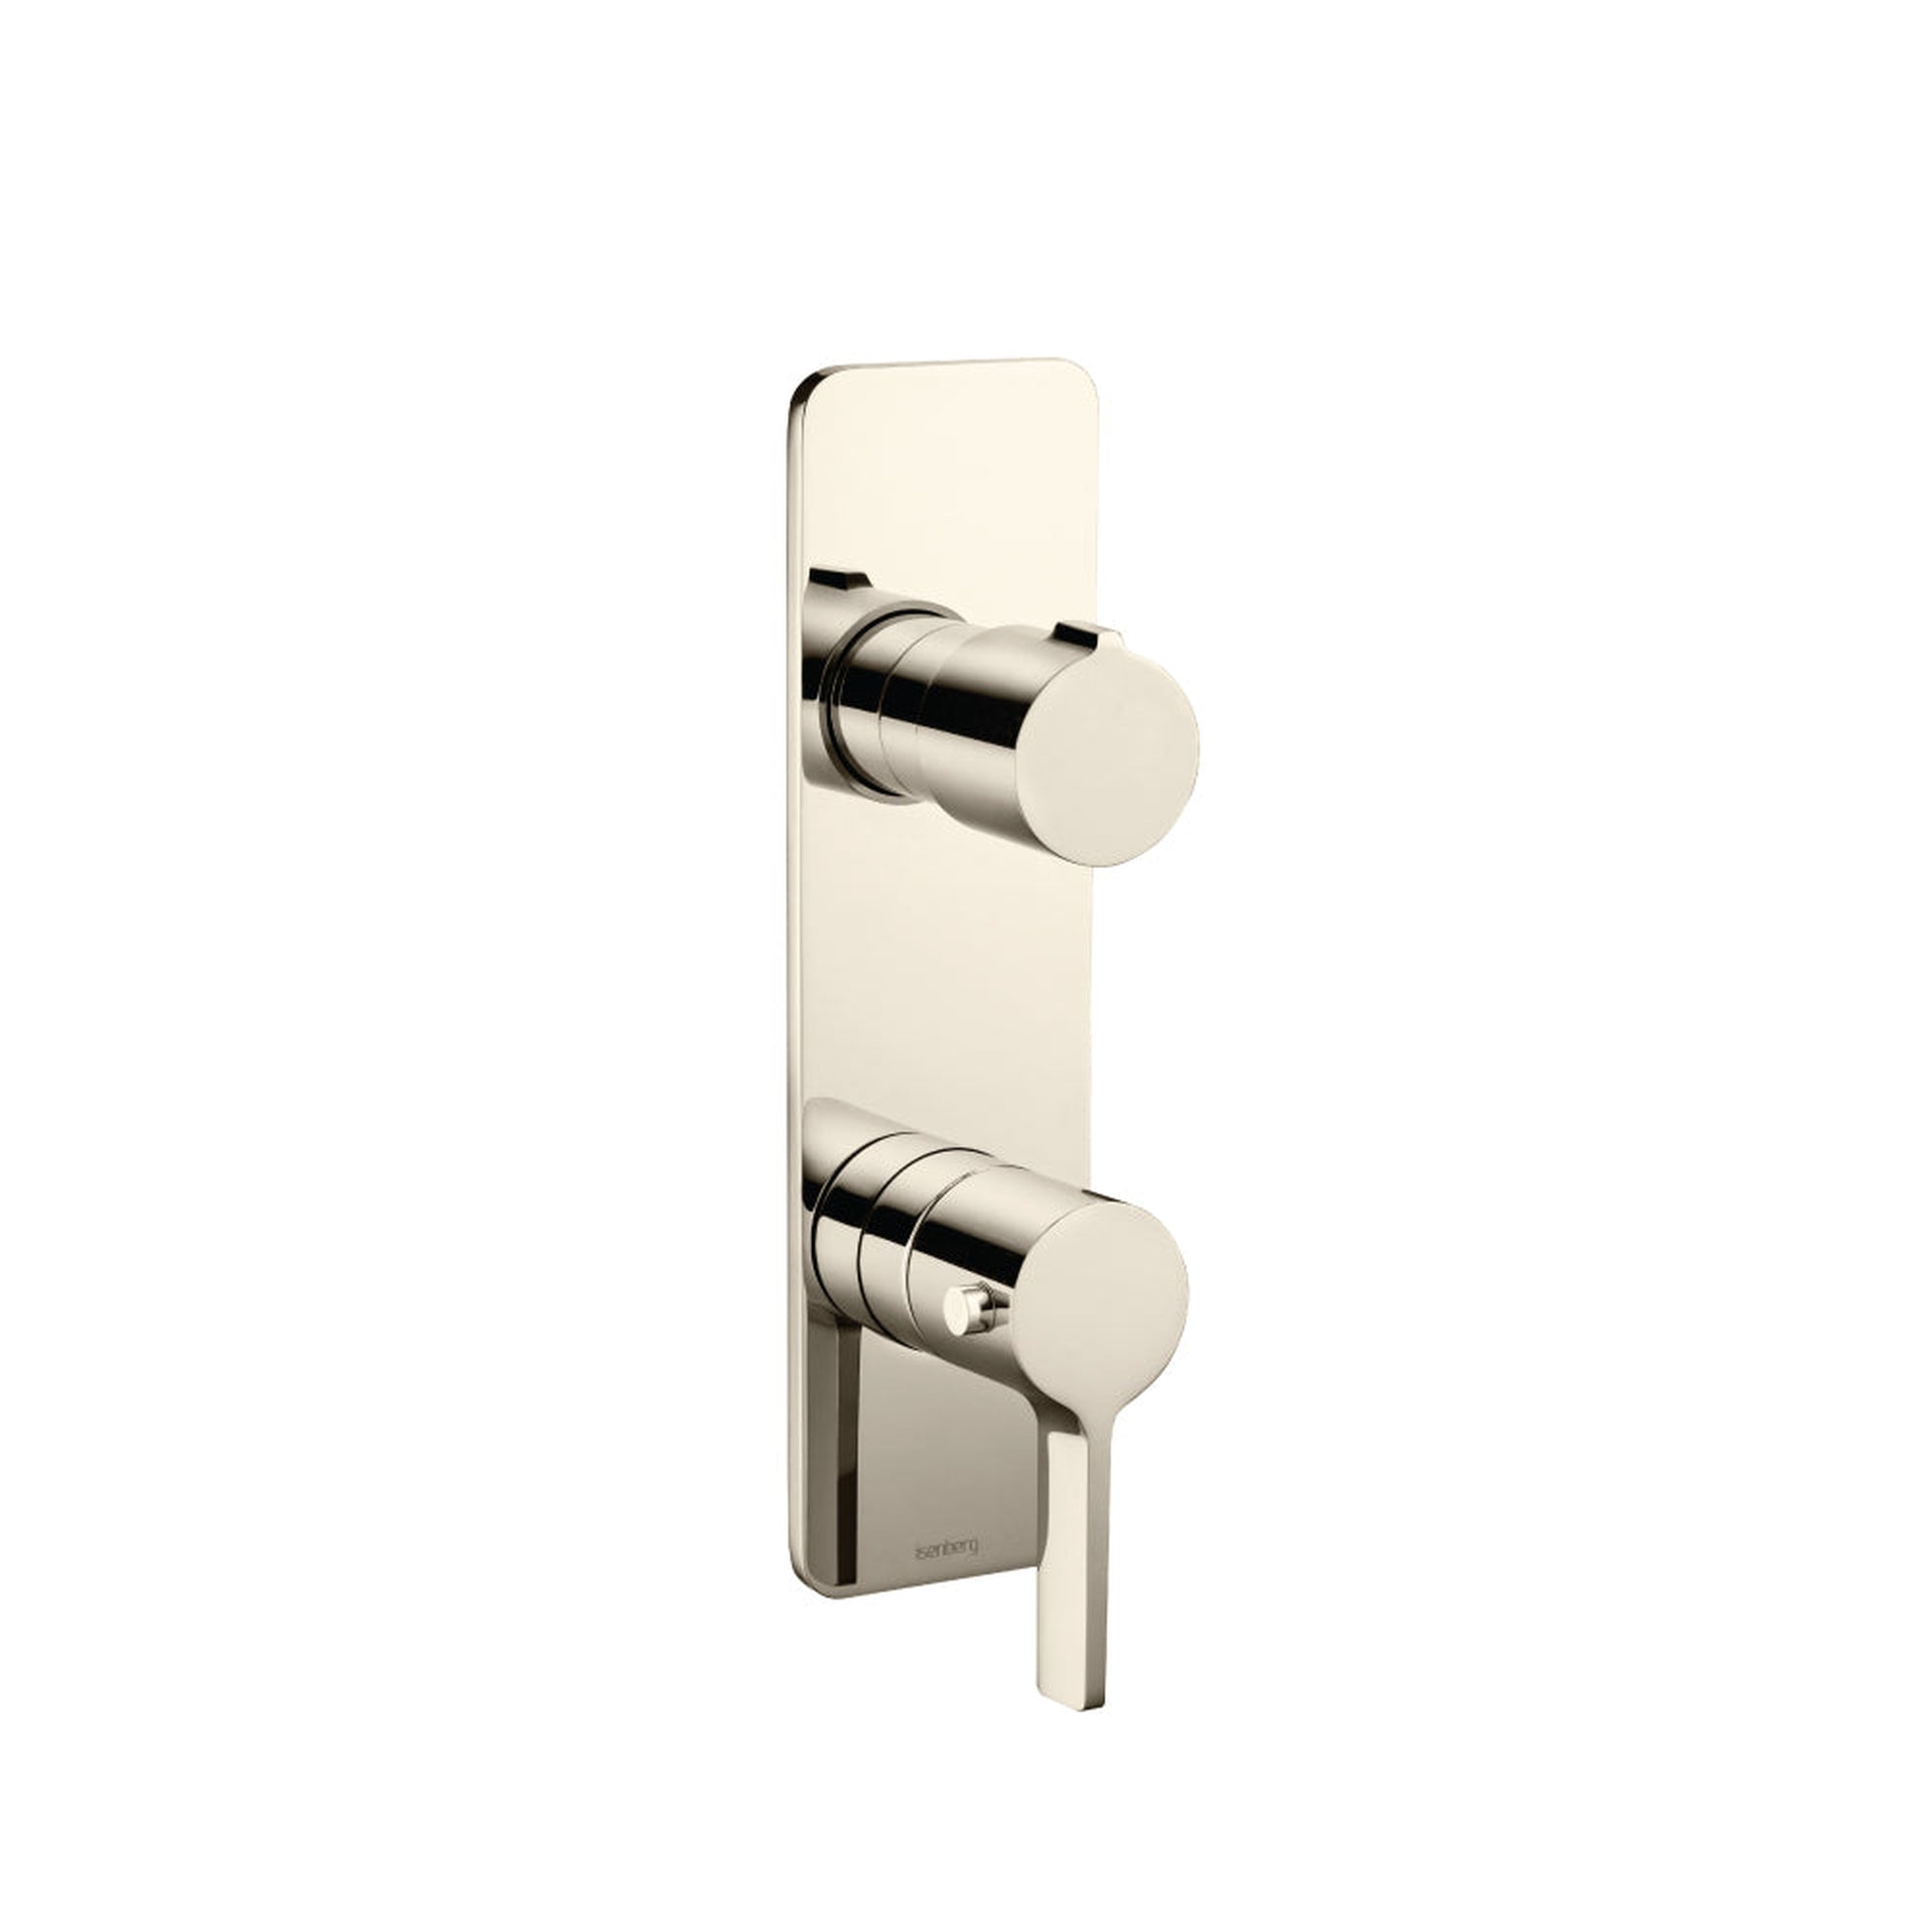 Isenberg Serie 260 Trim for Thermostatic Valve in Polished Nickel